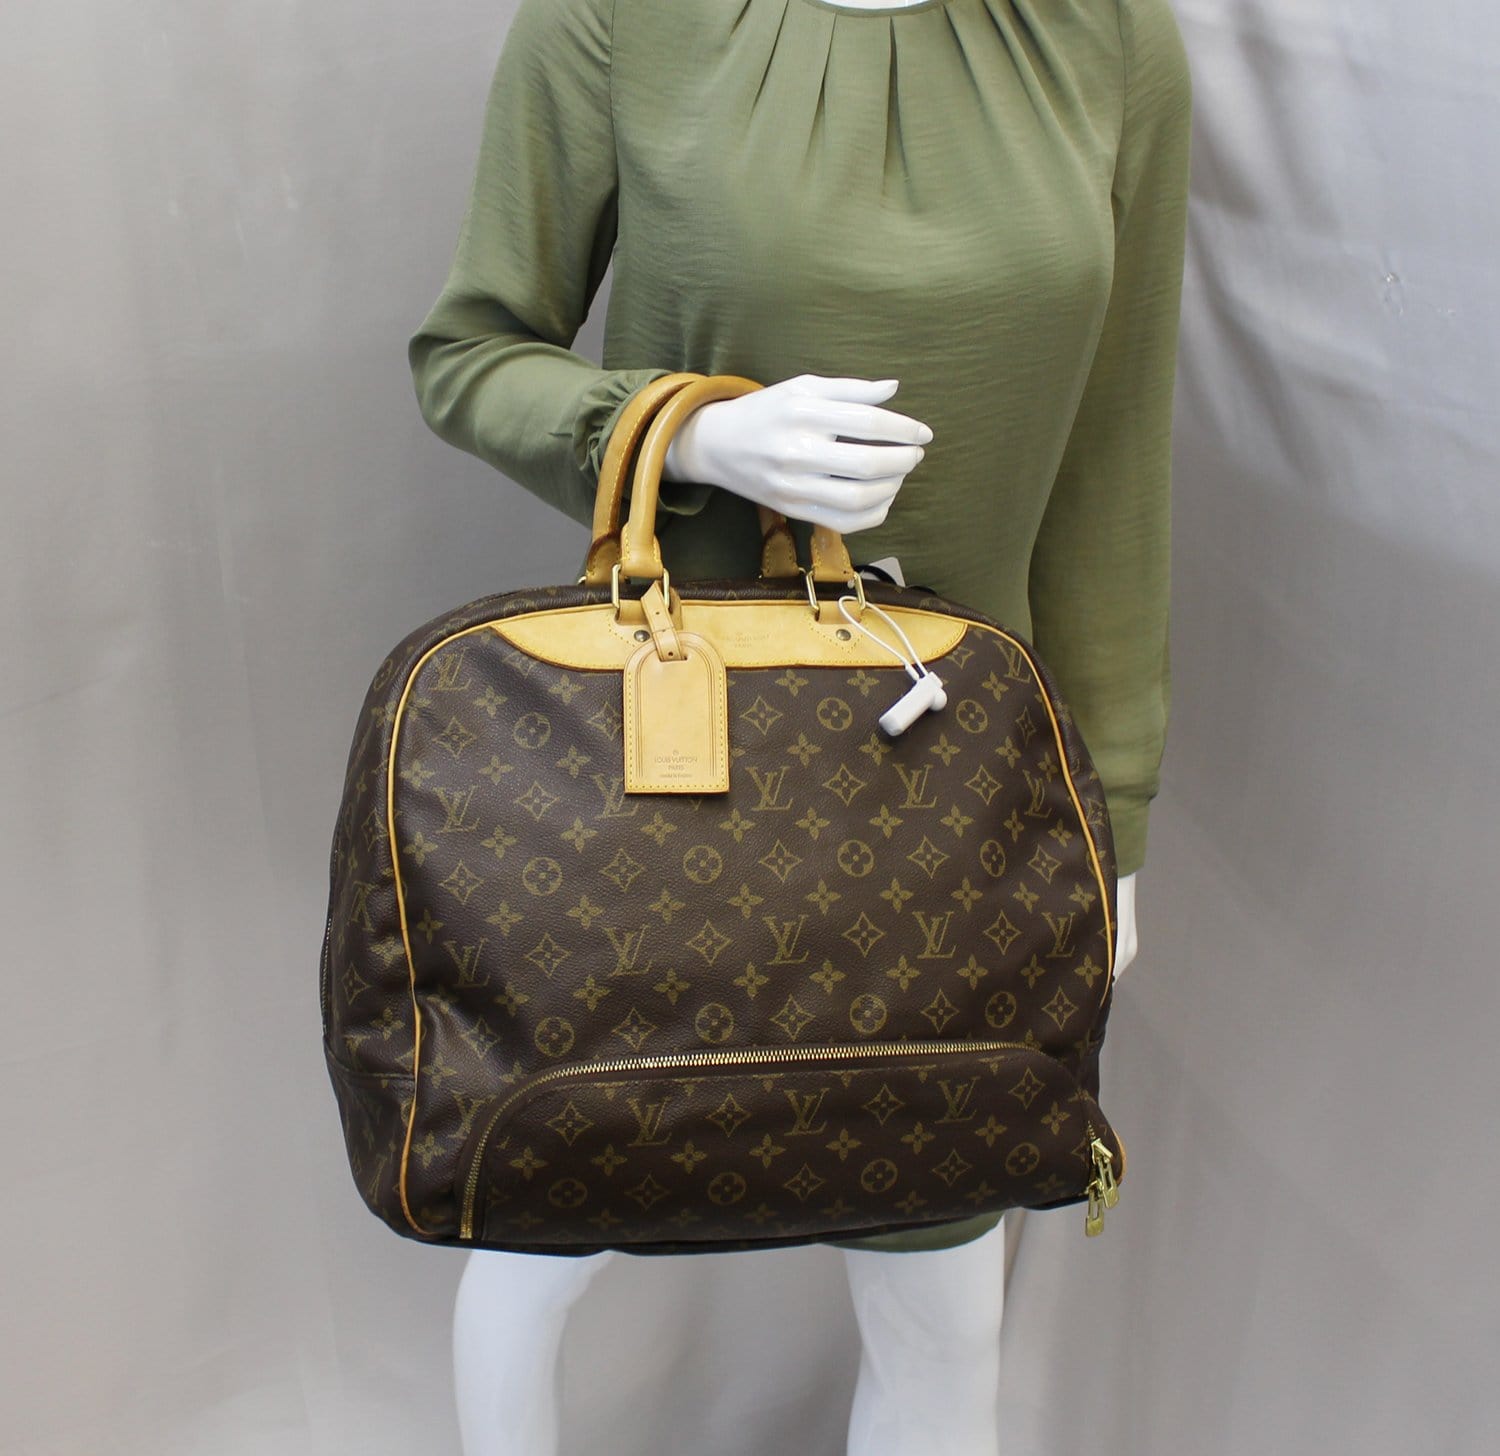 louis vuitton carry on bag price